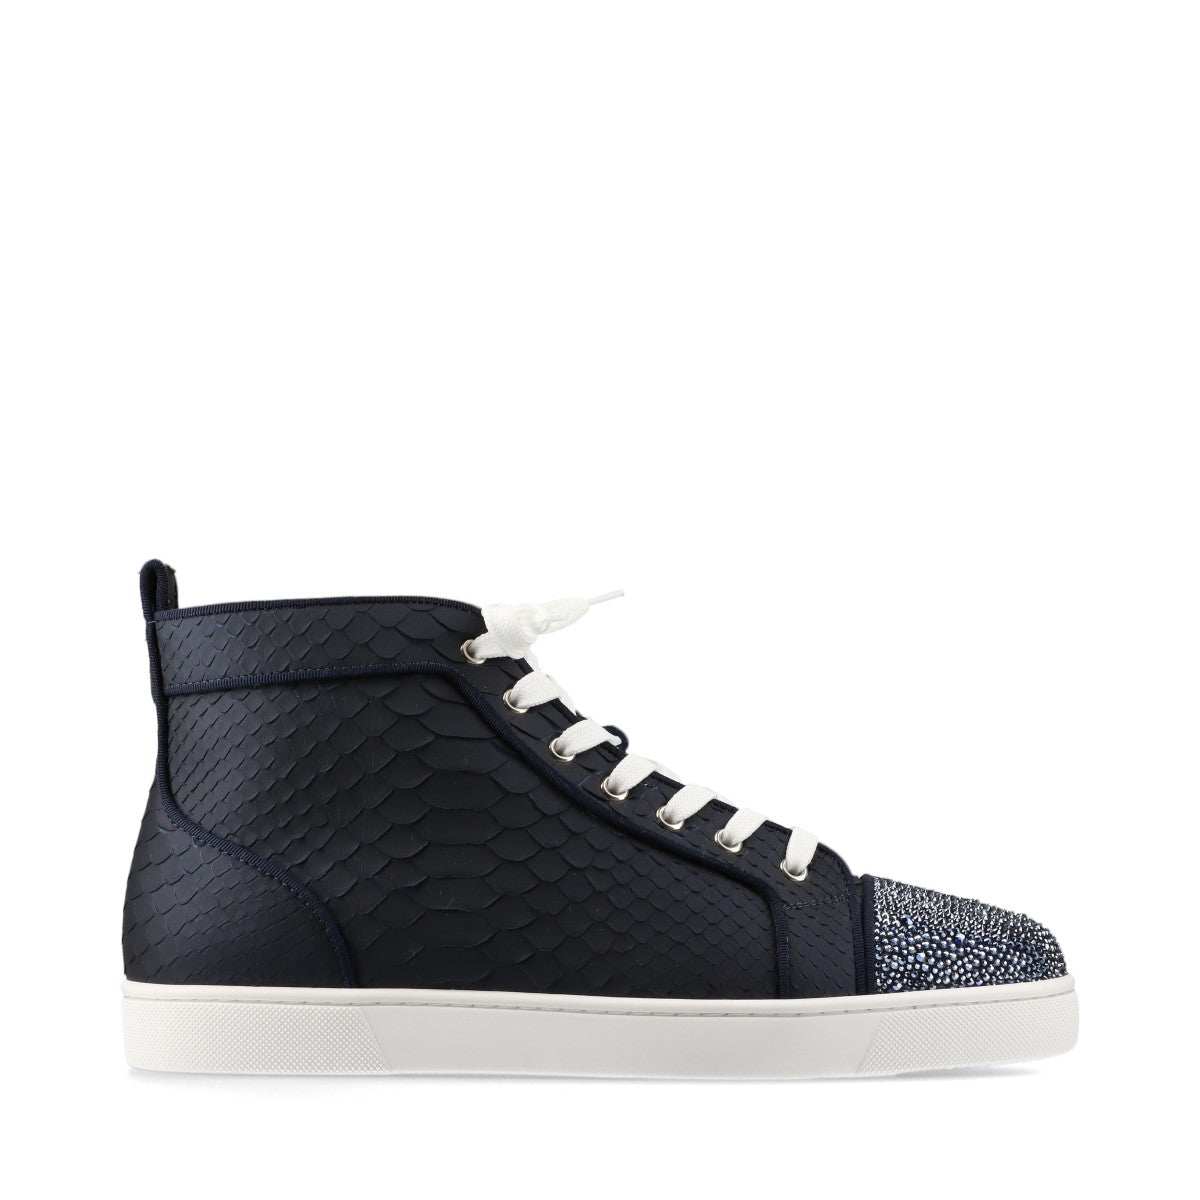 Christian Louboutin Louis Strass Leather High-top Sneakers 43.5 Men's Navy blue Rhinestone Python Replaceable cord box There is a storage bag